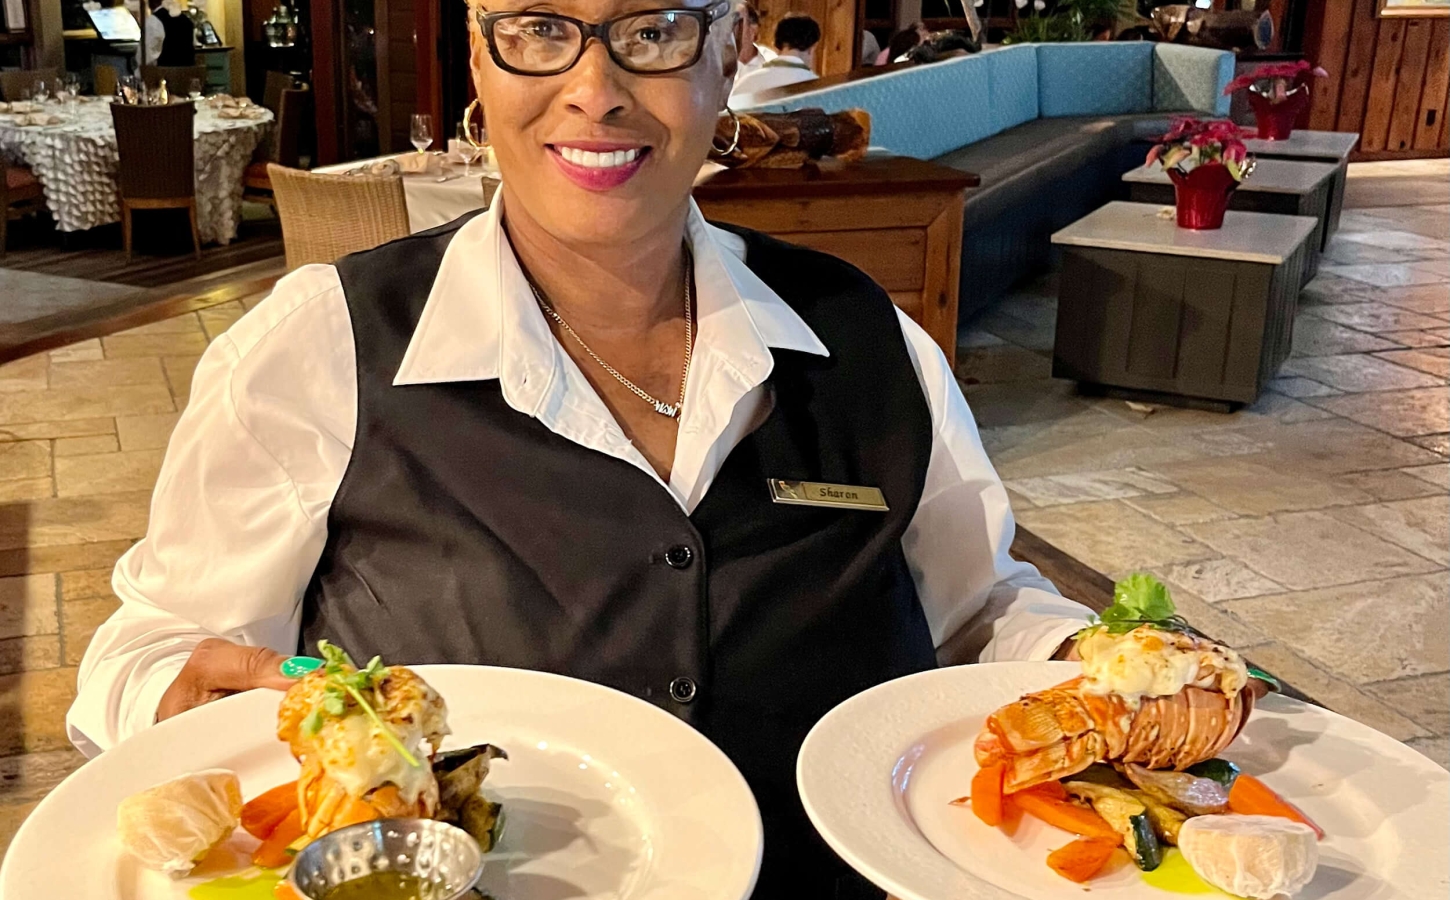 Friendly staff serving gourmet cuisine at The Abaco Club, reflecting the high standards of golf club hospitality and coastal living.